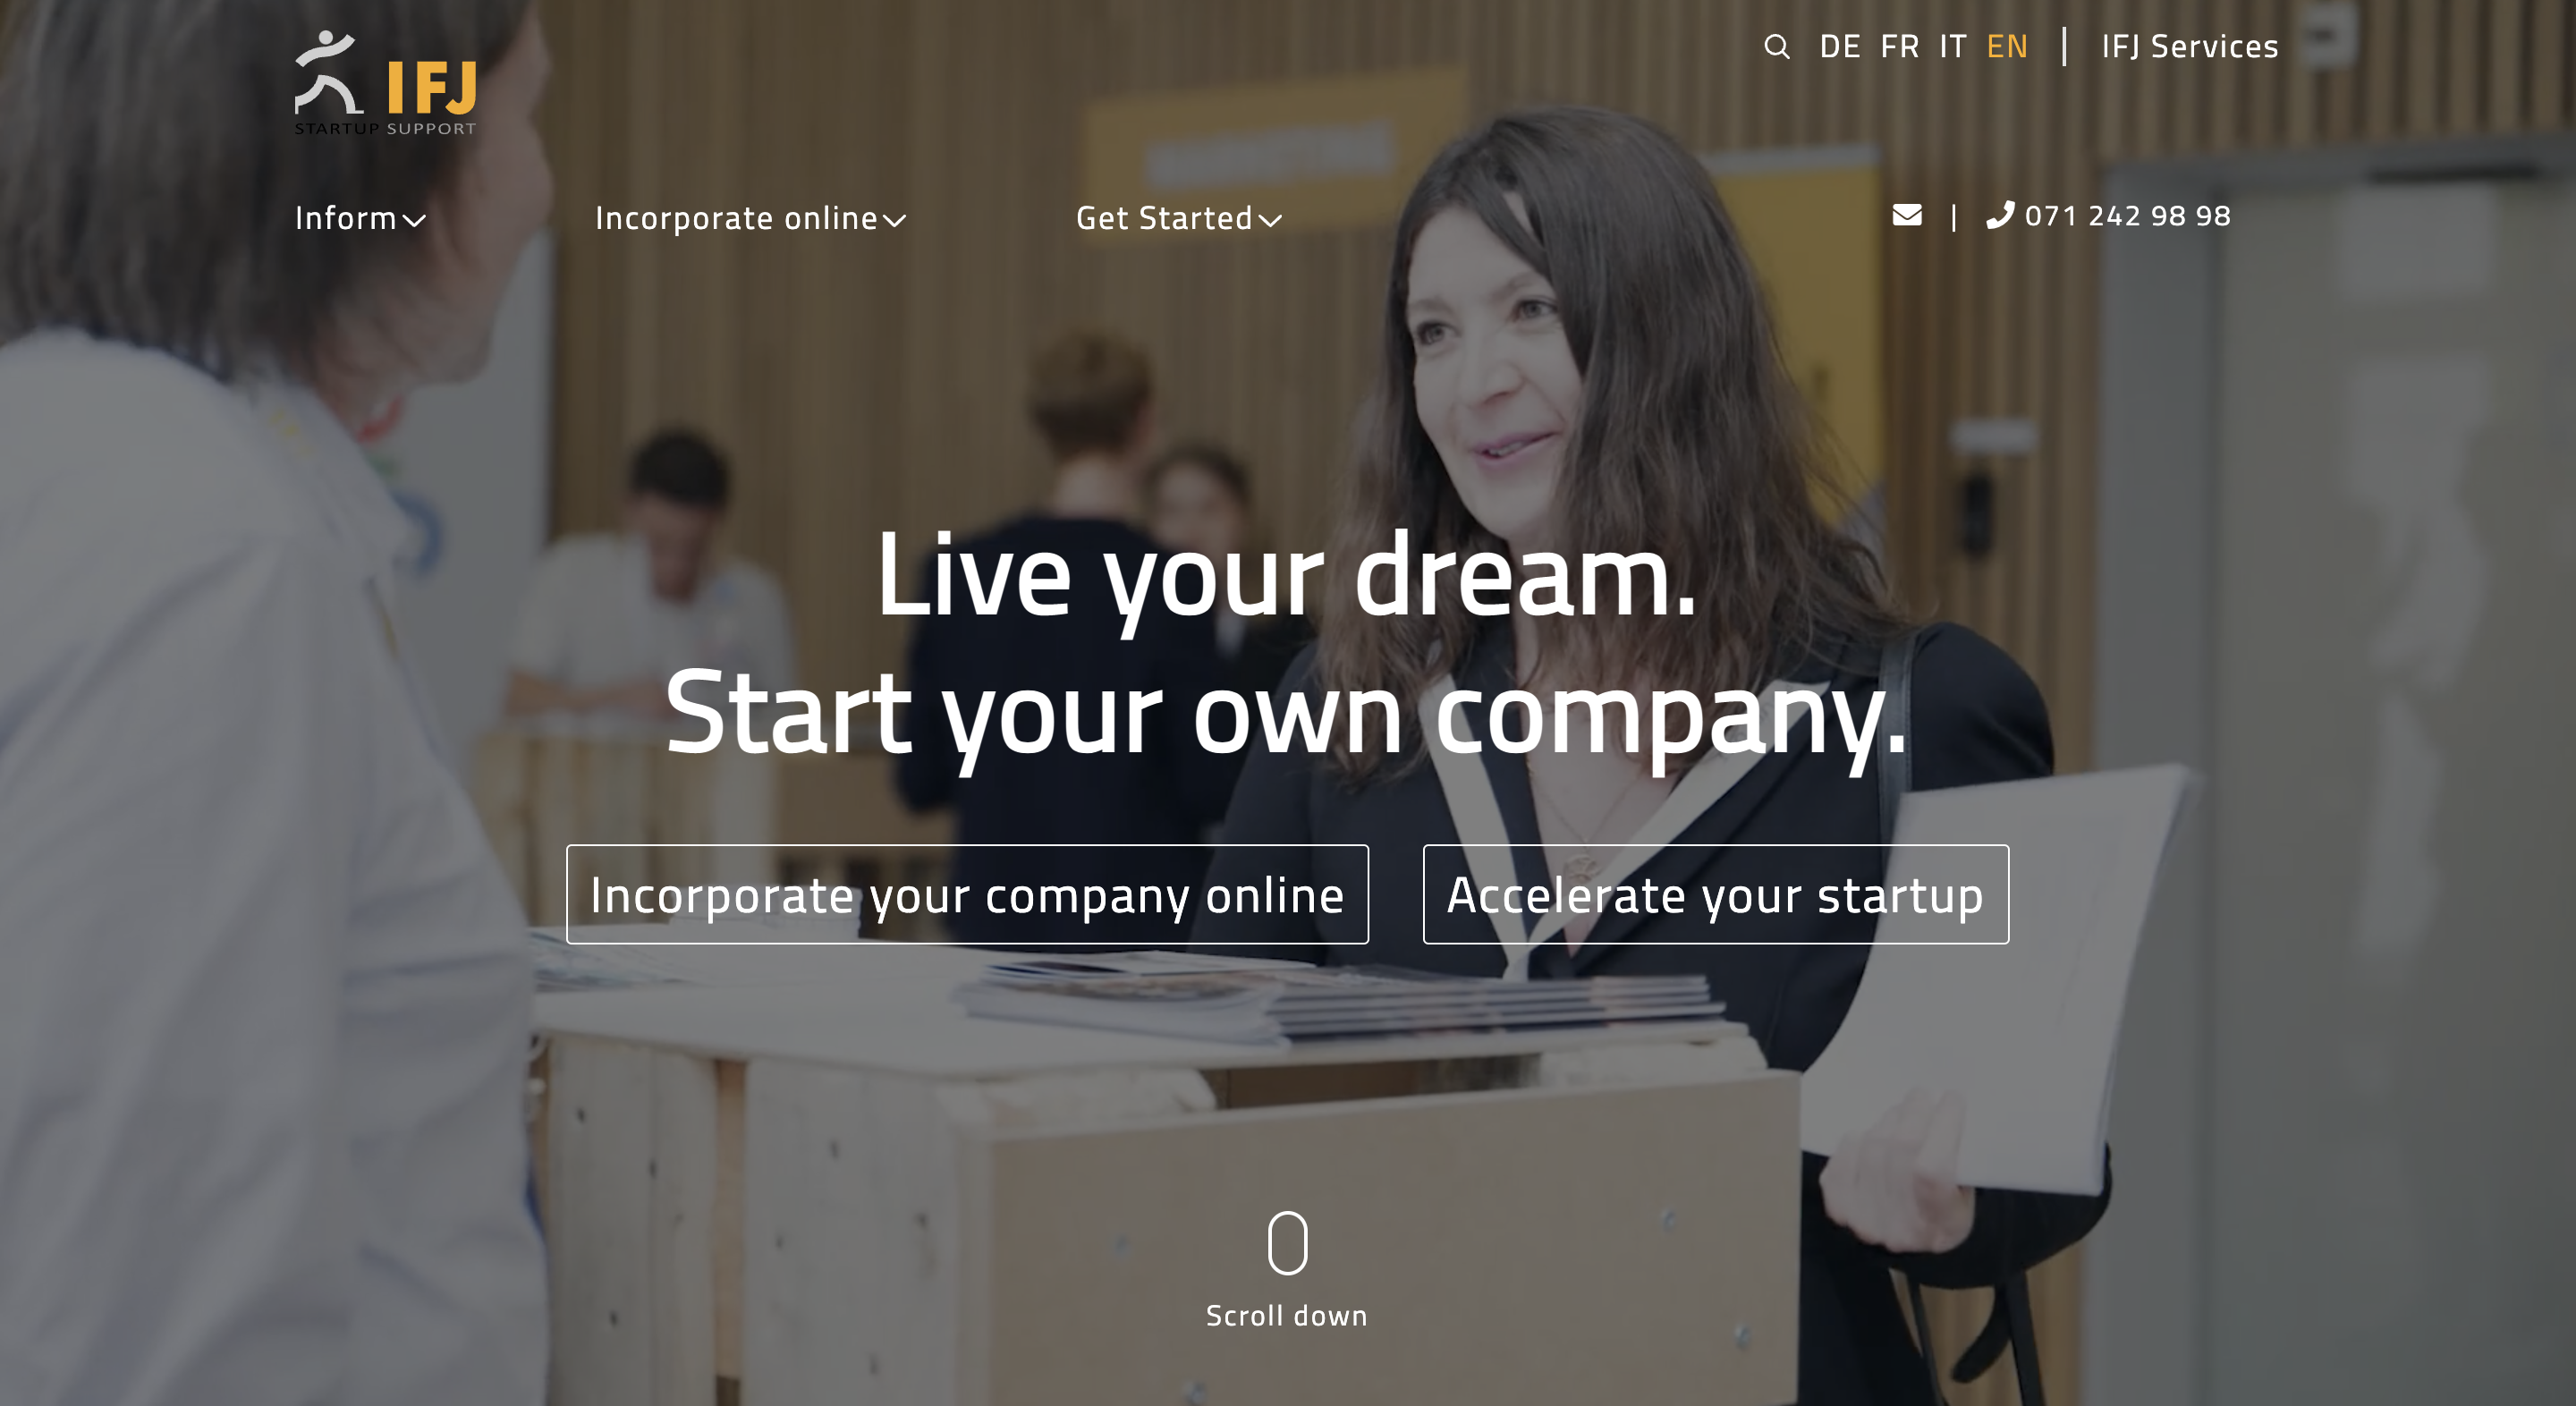 ifj - start your own company.png